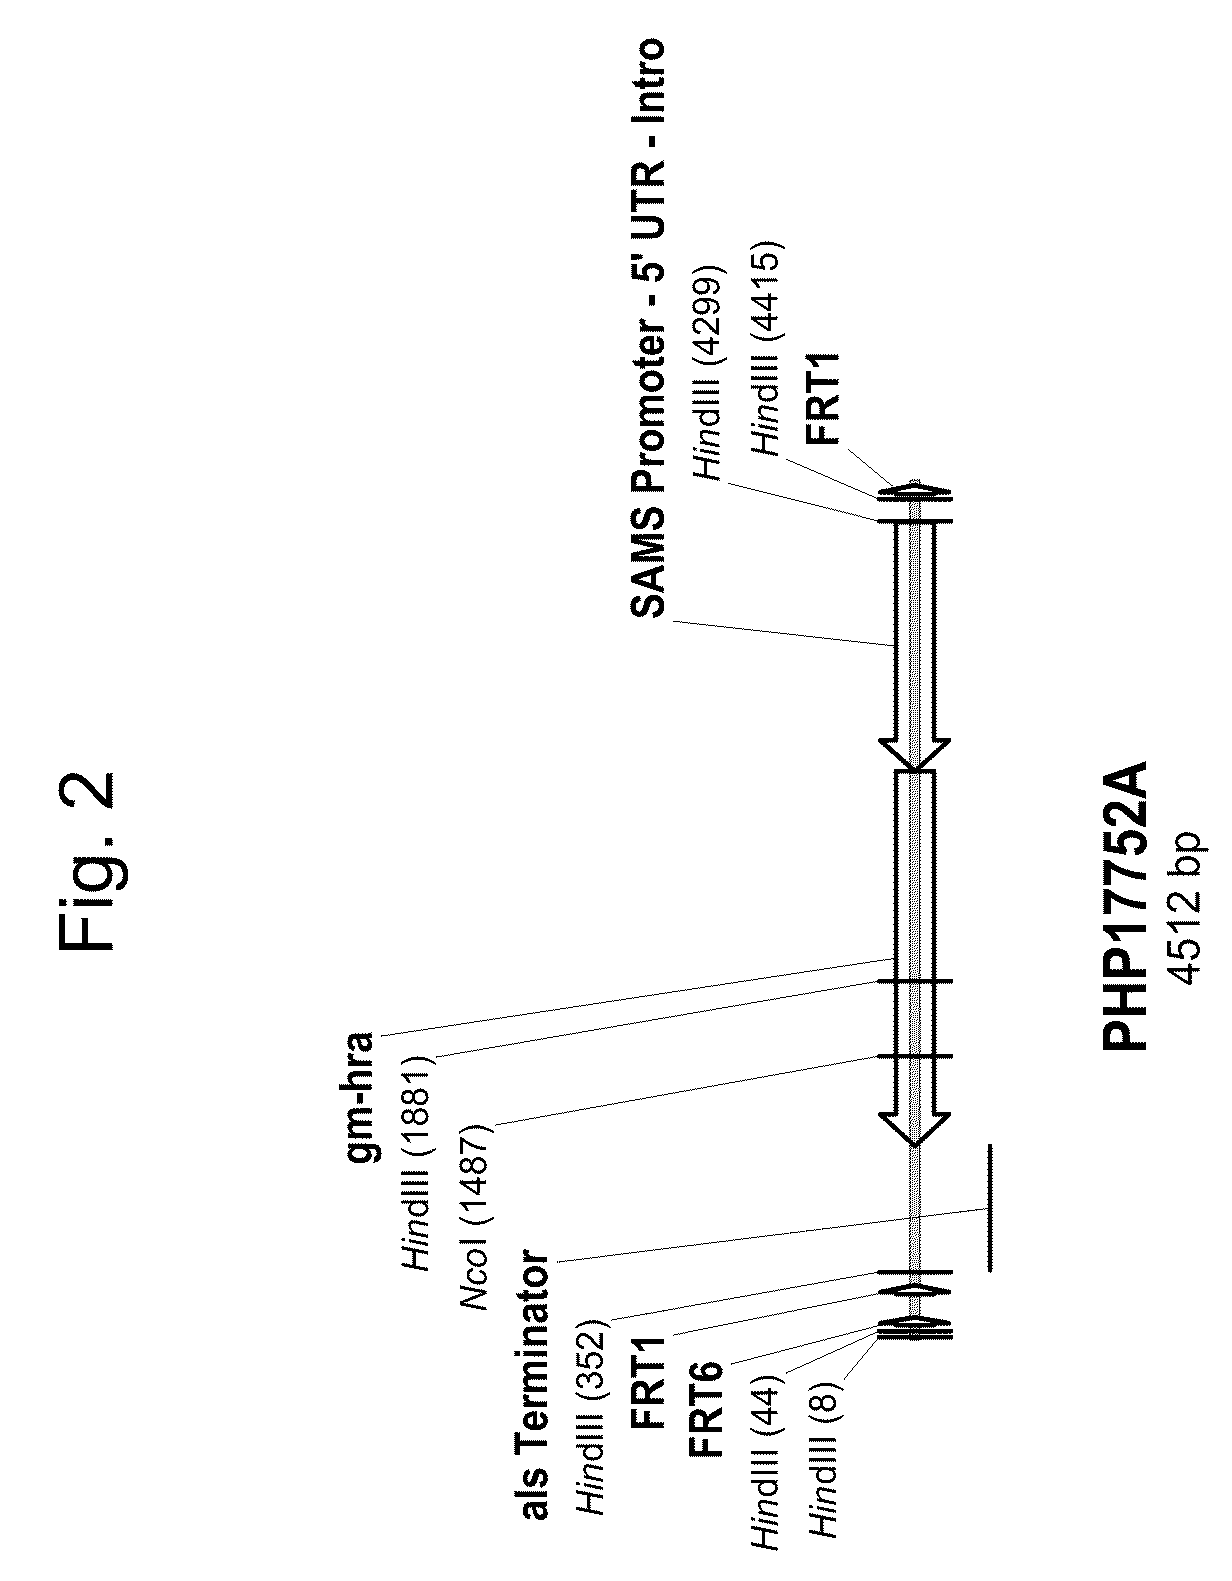 Soybean event dp-305423-1 and compositions and methods for the identification and/or detection thereof